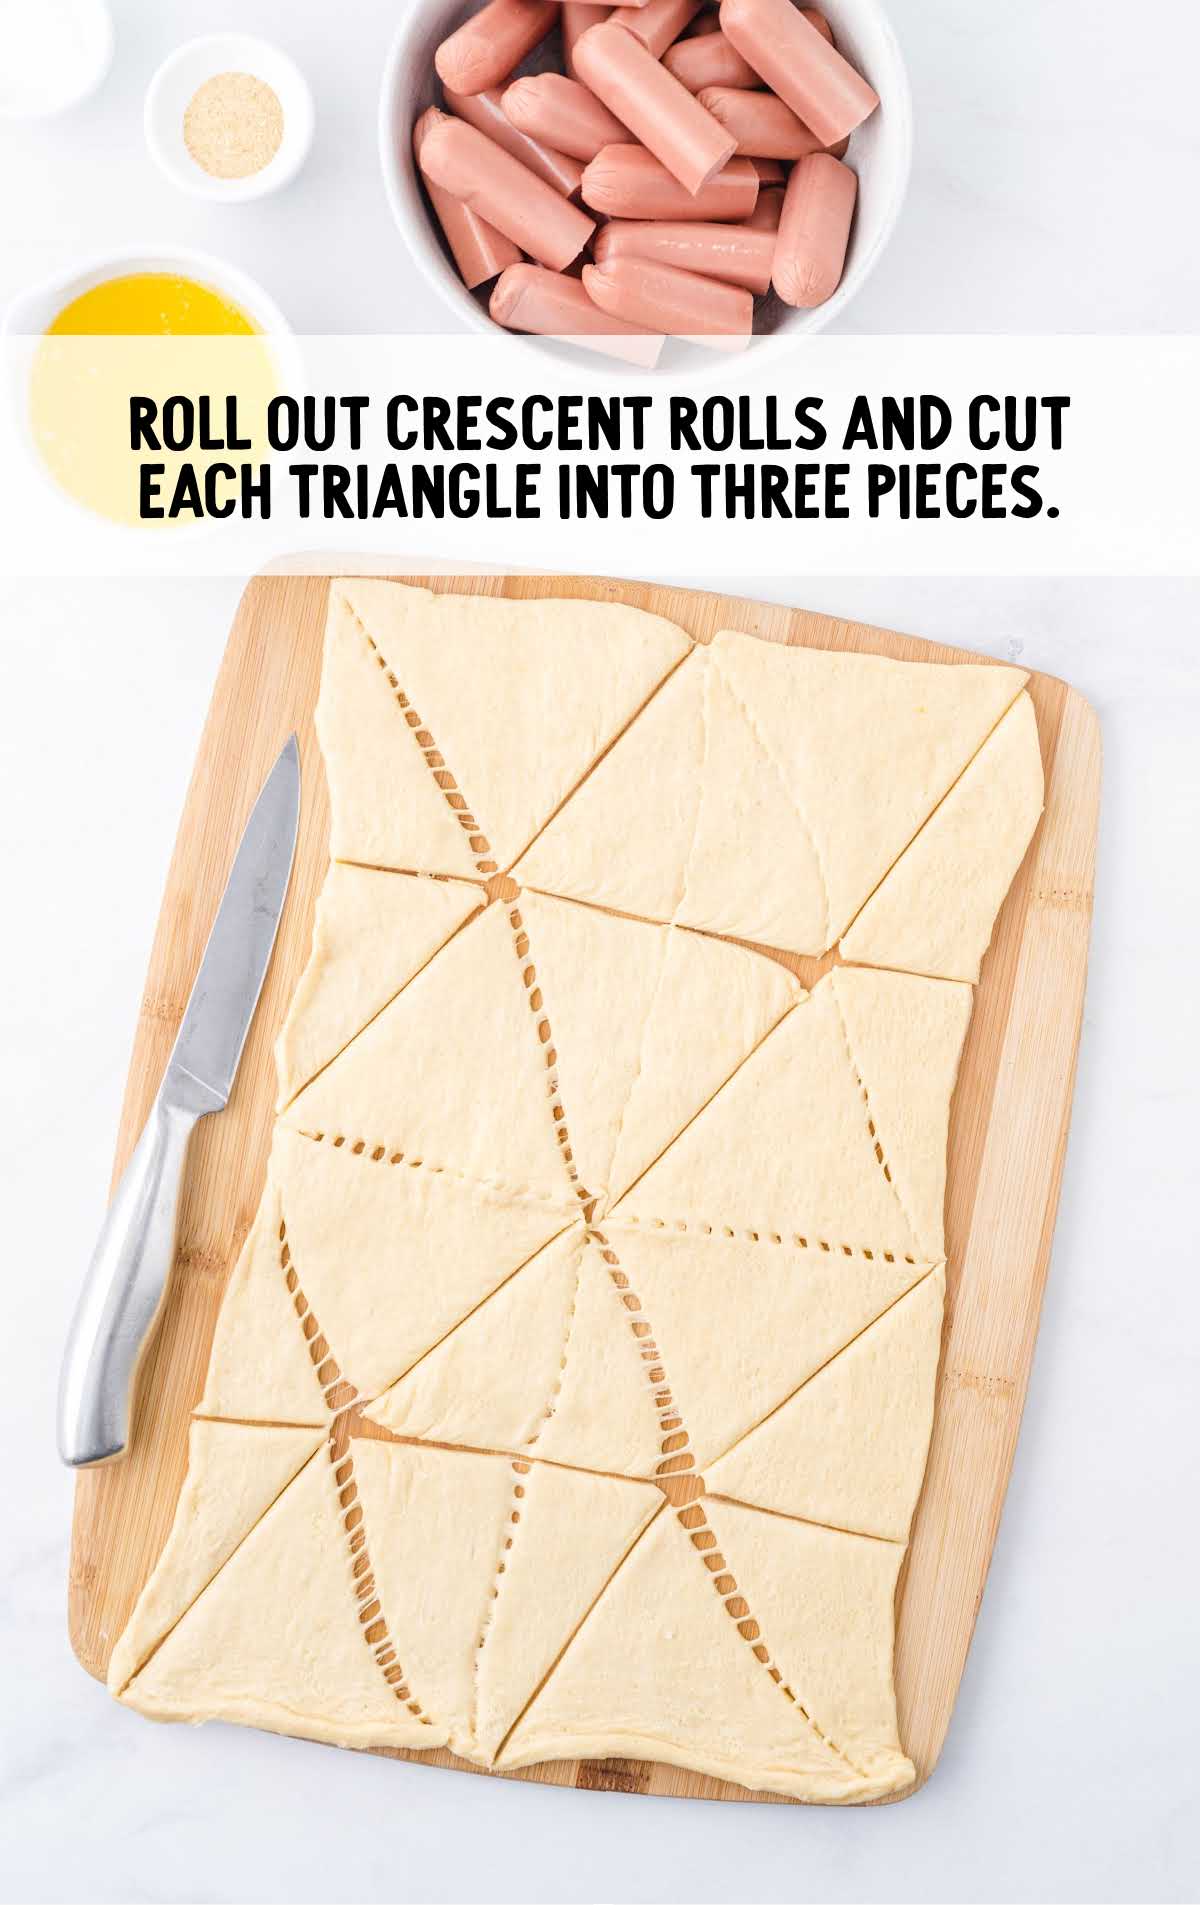 crescent roll dough rolled out and then cut each triangle into 3 pieces